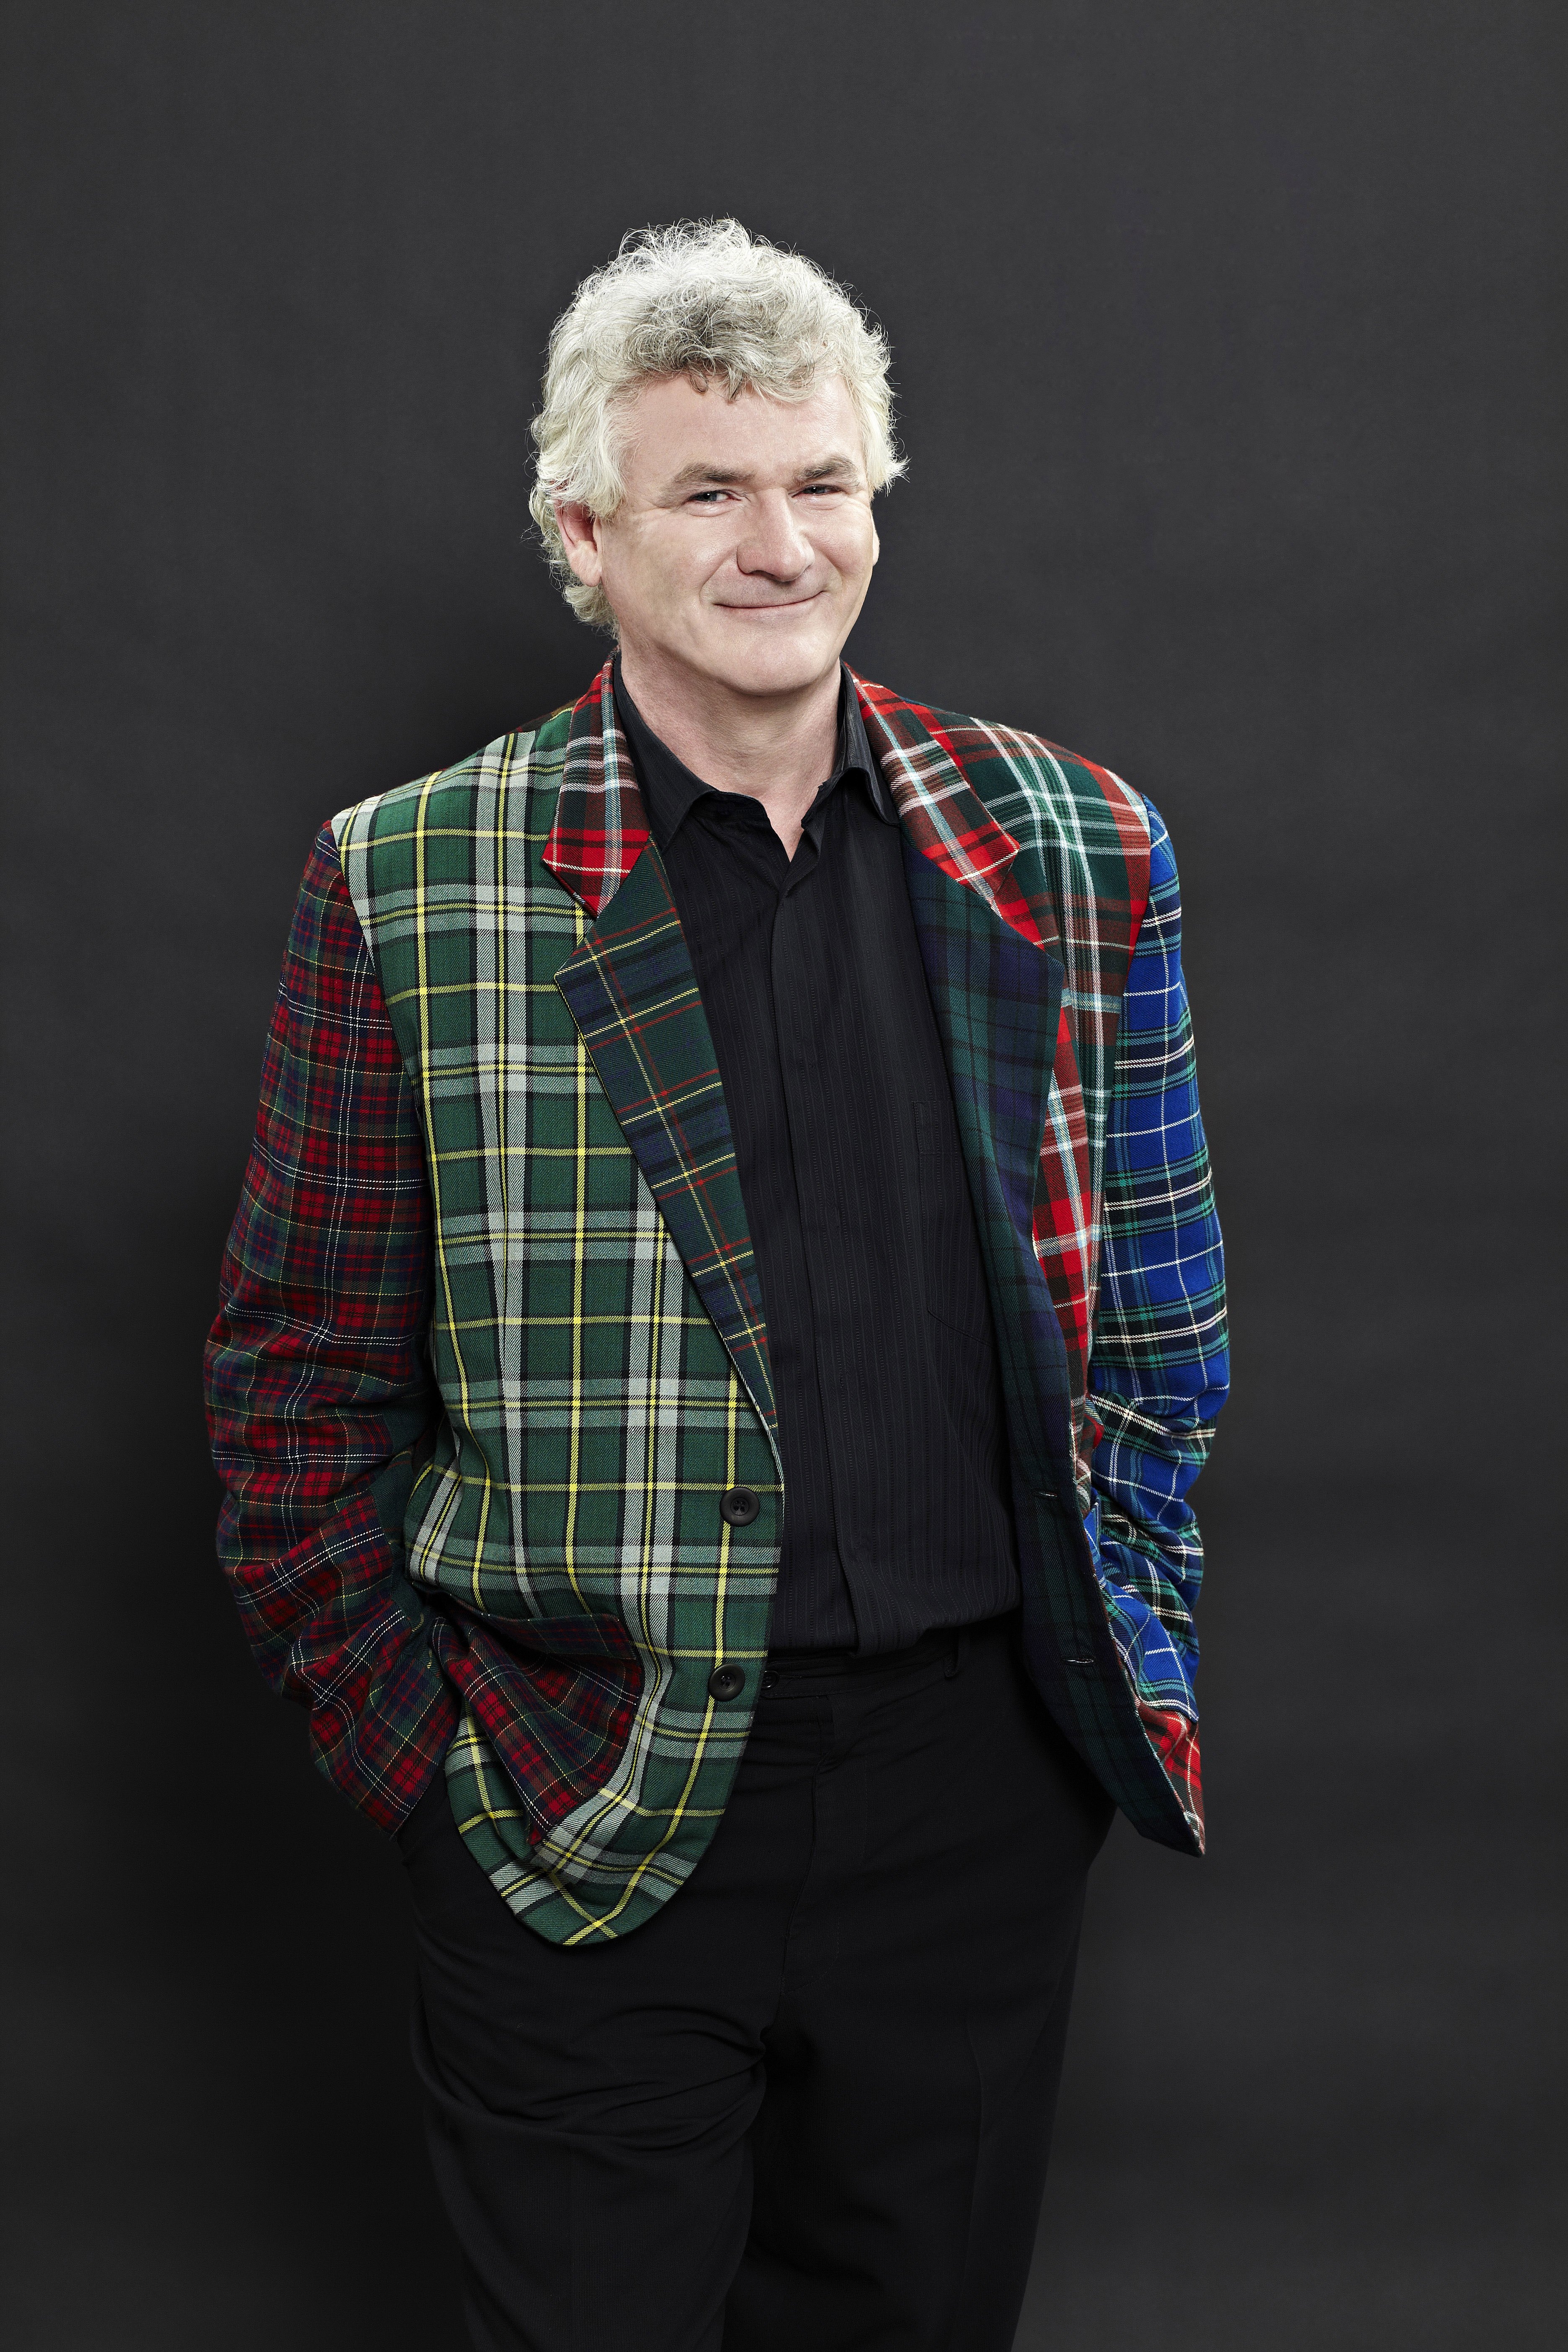 MILESTONE – Crooner John McDermott is including Red Deer on his spring tour marking his 20th year in music. He performs April 4th at the Memorial Centre.